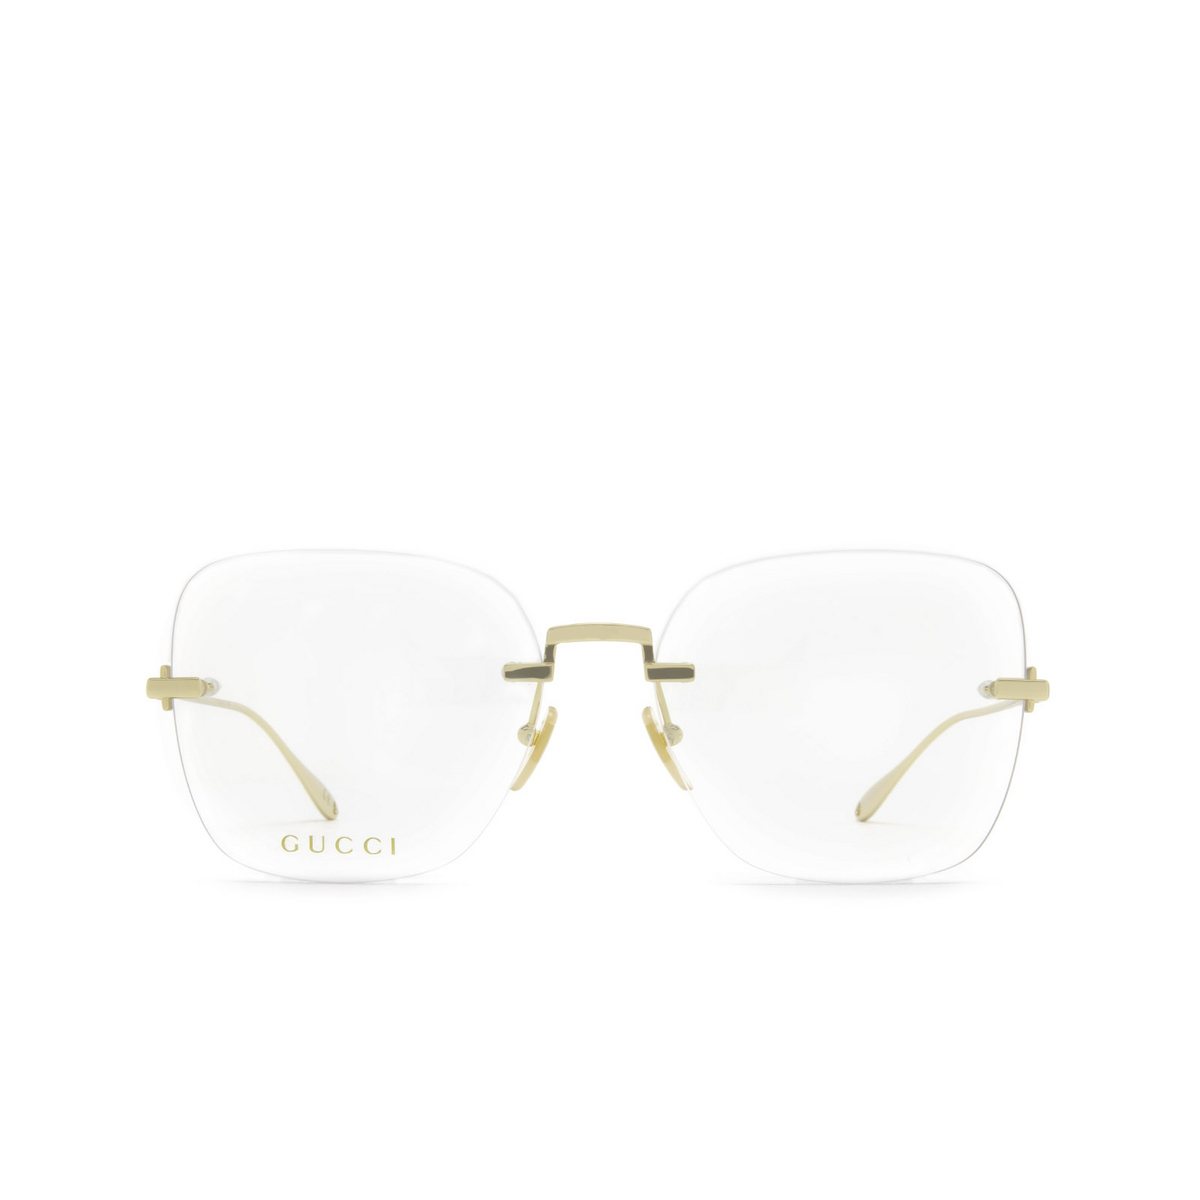 Gucci® Square Eyeglasses: GG1150O color Gold 002 - front view.